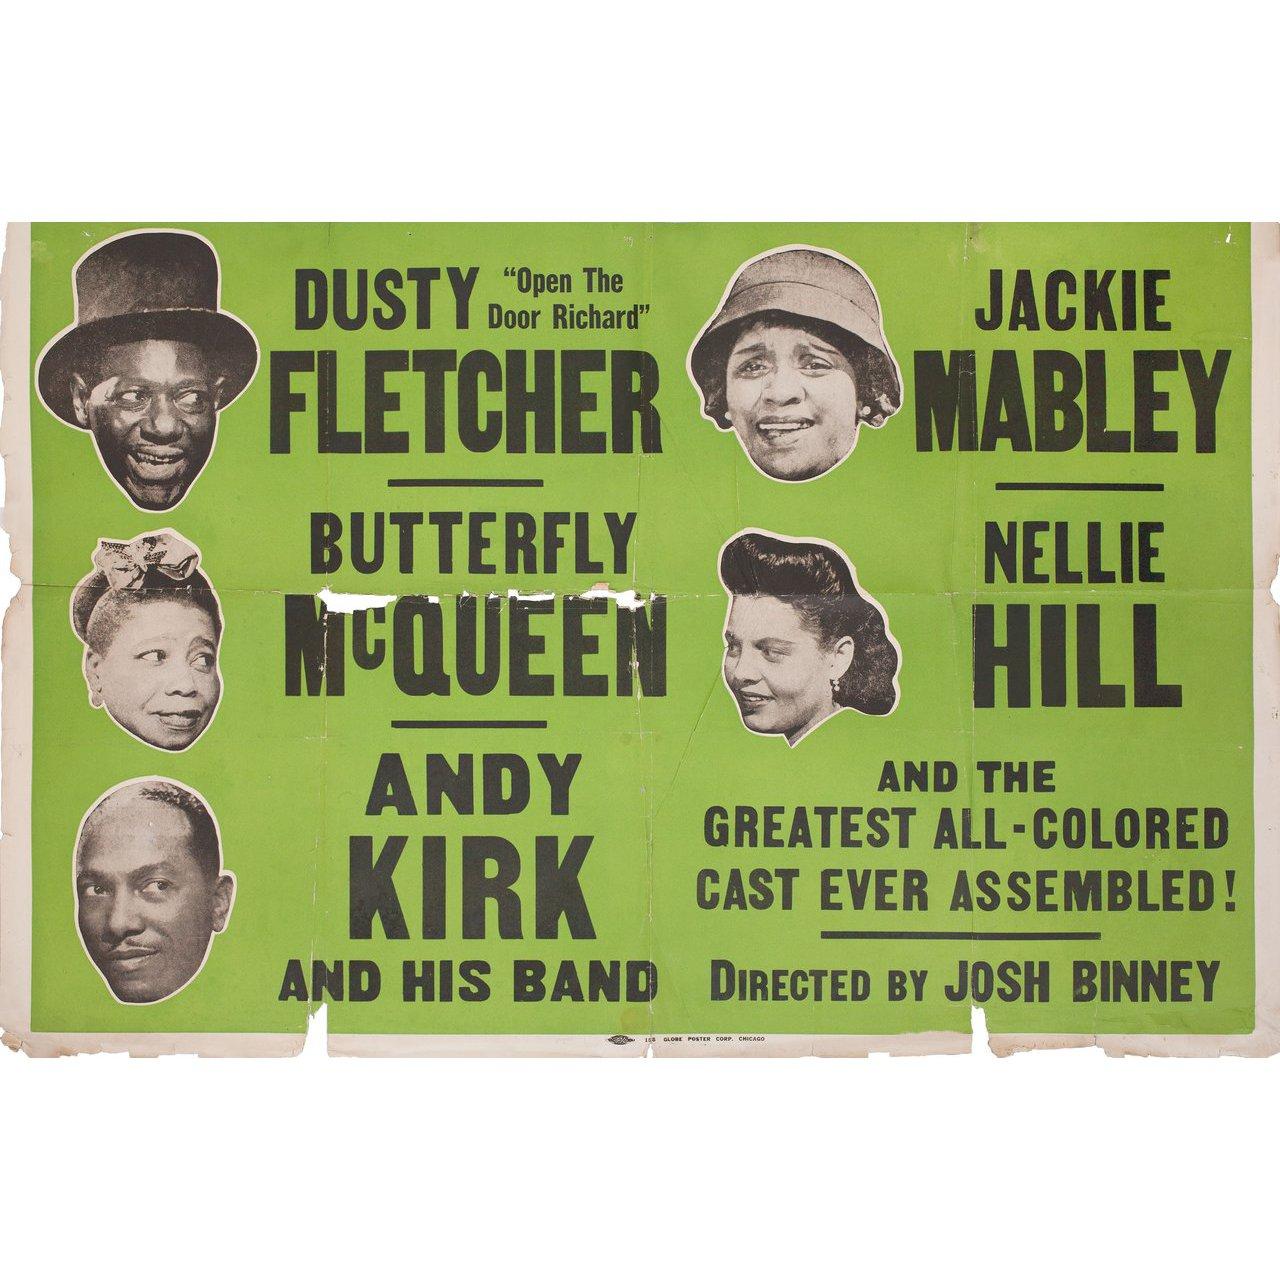 Original 1948 U.S. three sheet poster for the film Killer Diller directed by Josh Binney with Dusty Fletcher / George Wiltshire / Butterfly McQueen / Nellie Hill. Fair condition, folded. Many original posters were issued folded or were subsequently